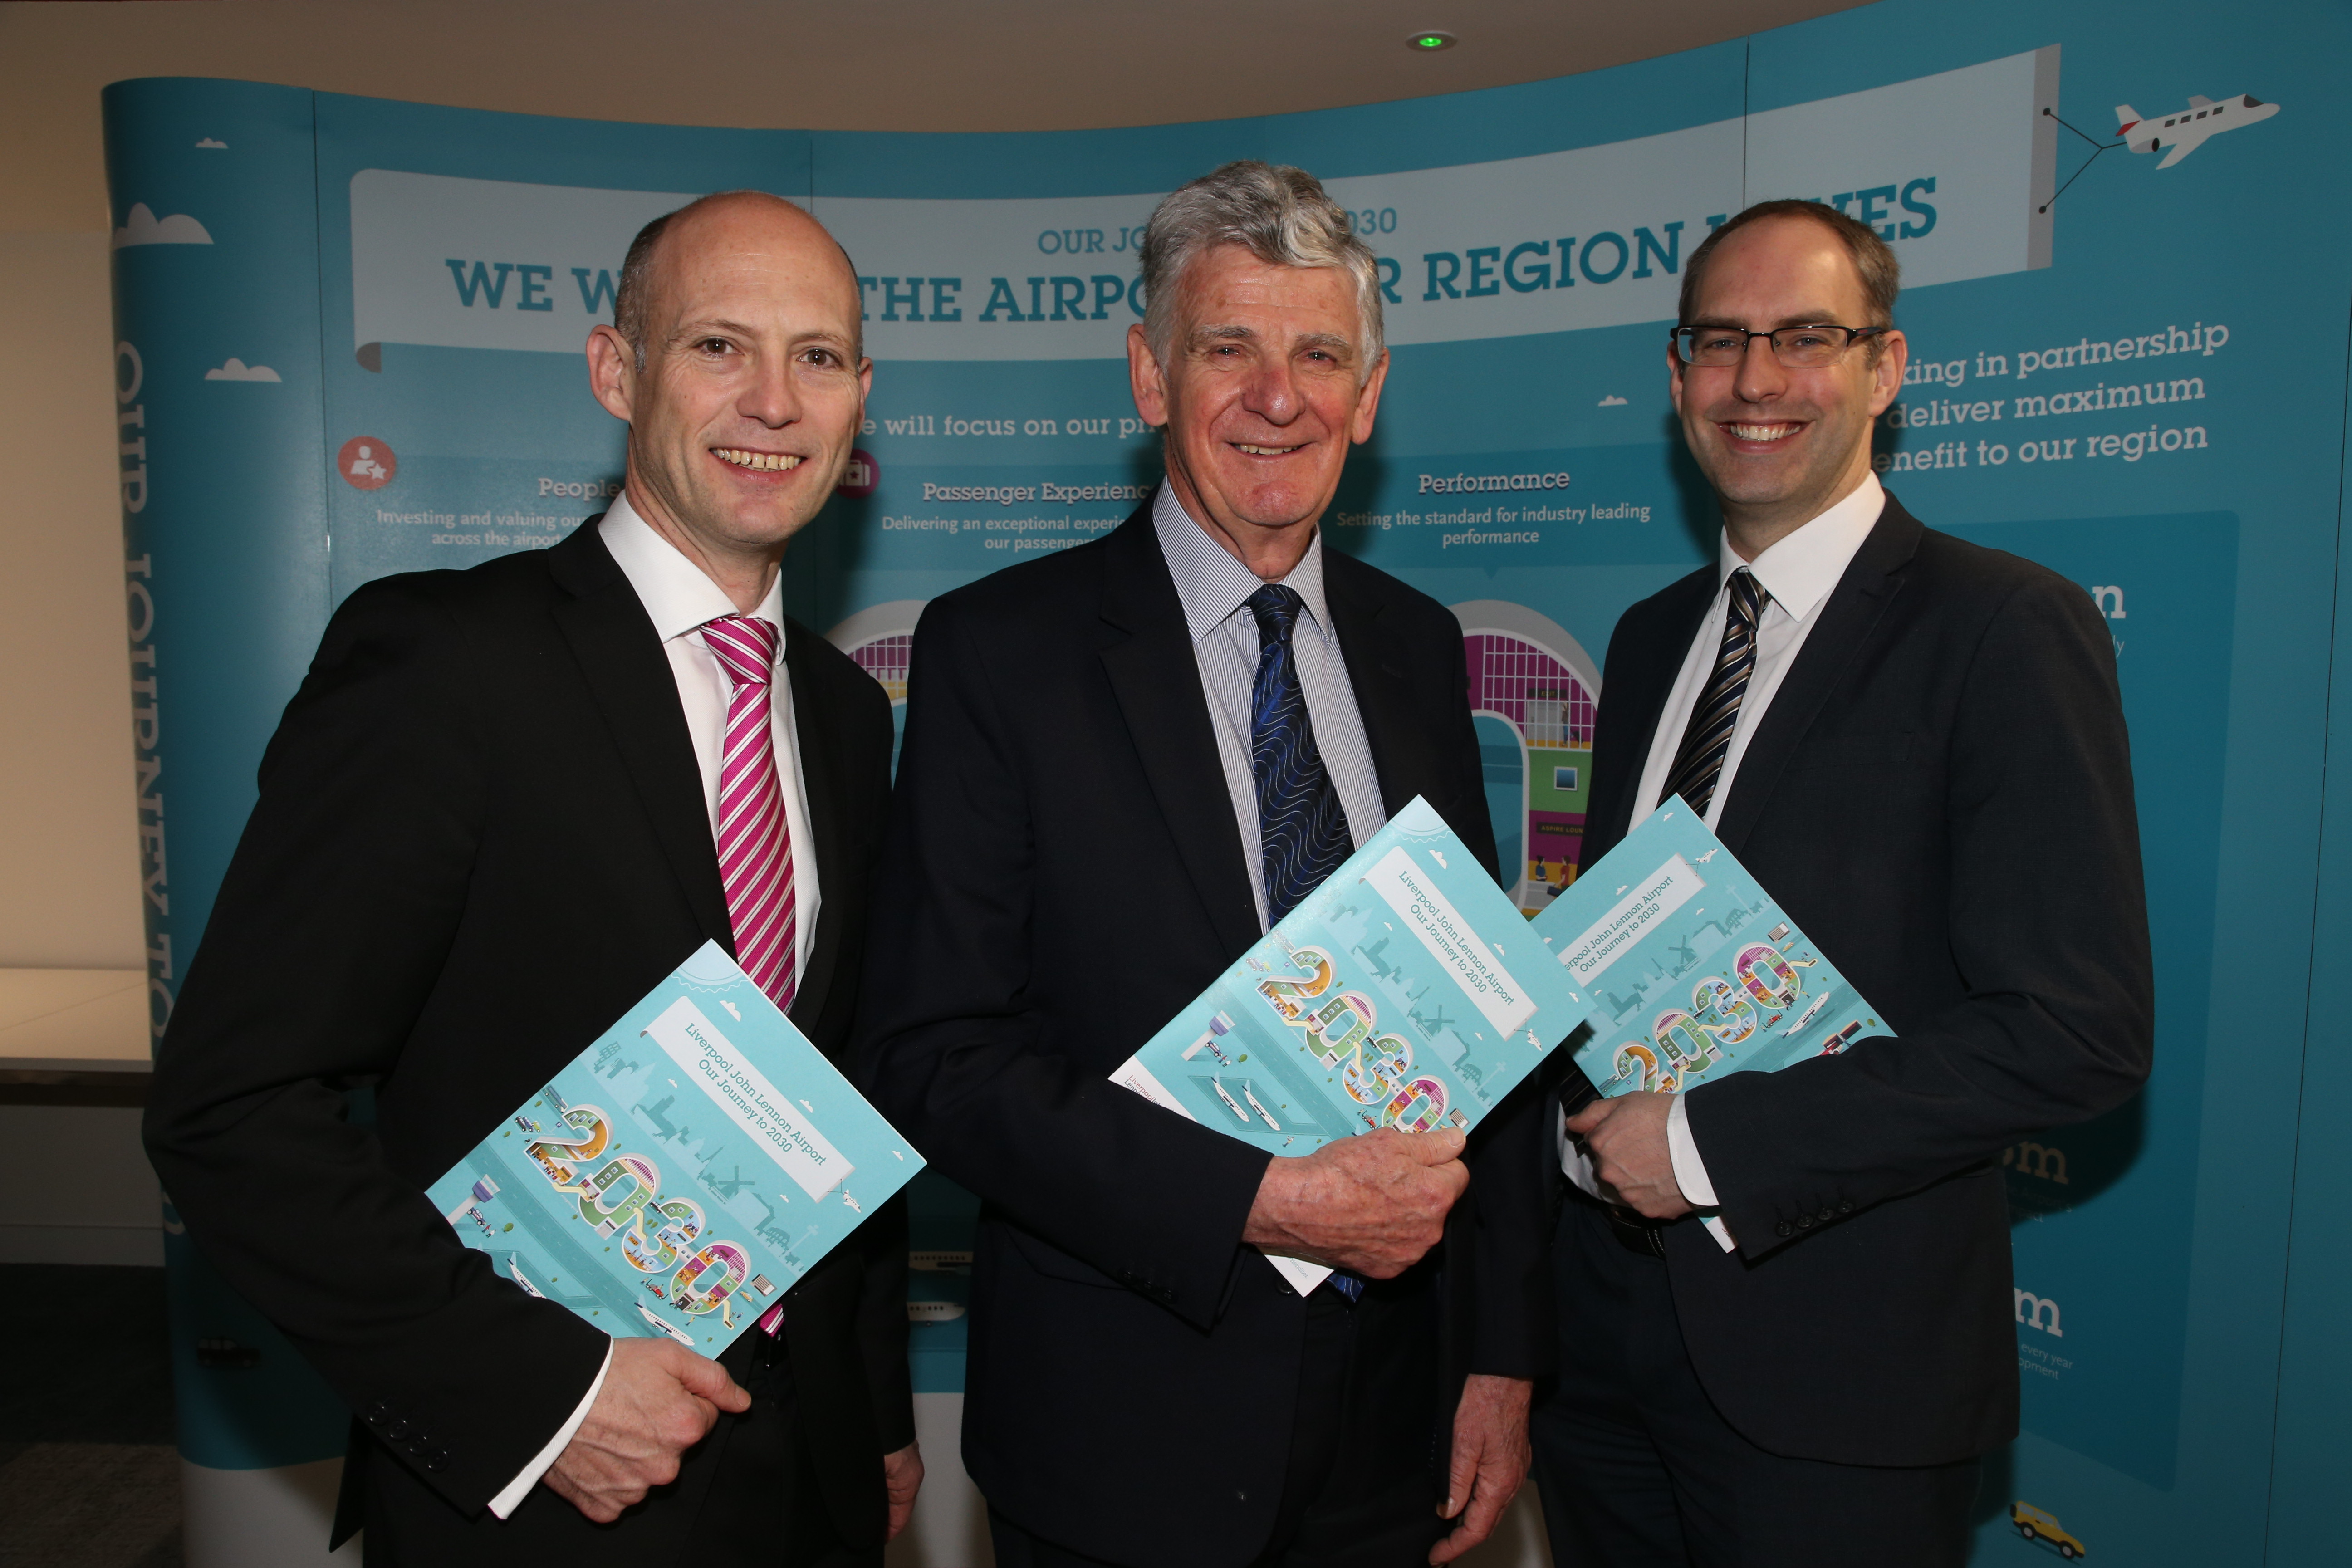 (L to R) LJLA’s Strategy Director Mark Povall, Chairman Robert Hough and CEO John Irving at the launch of the Airport’s Strategic Vision to 2030